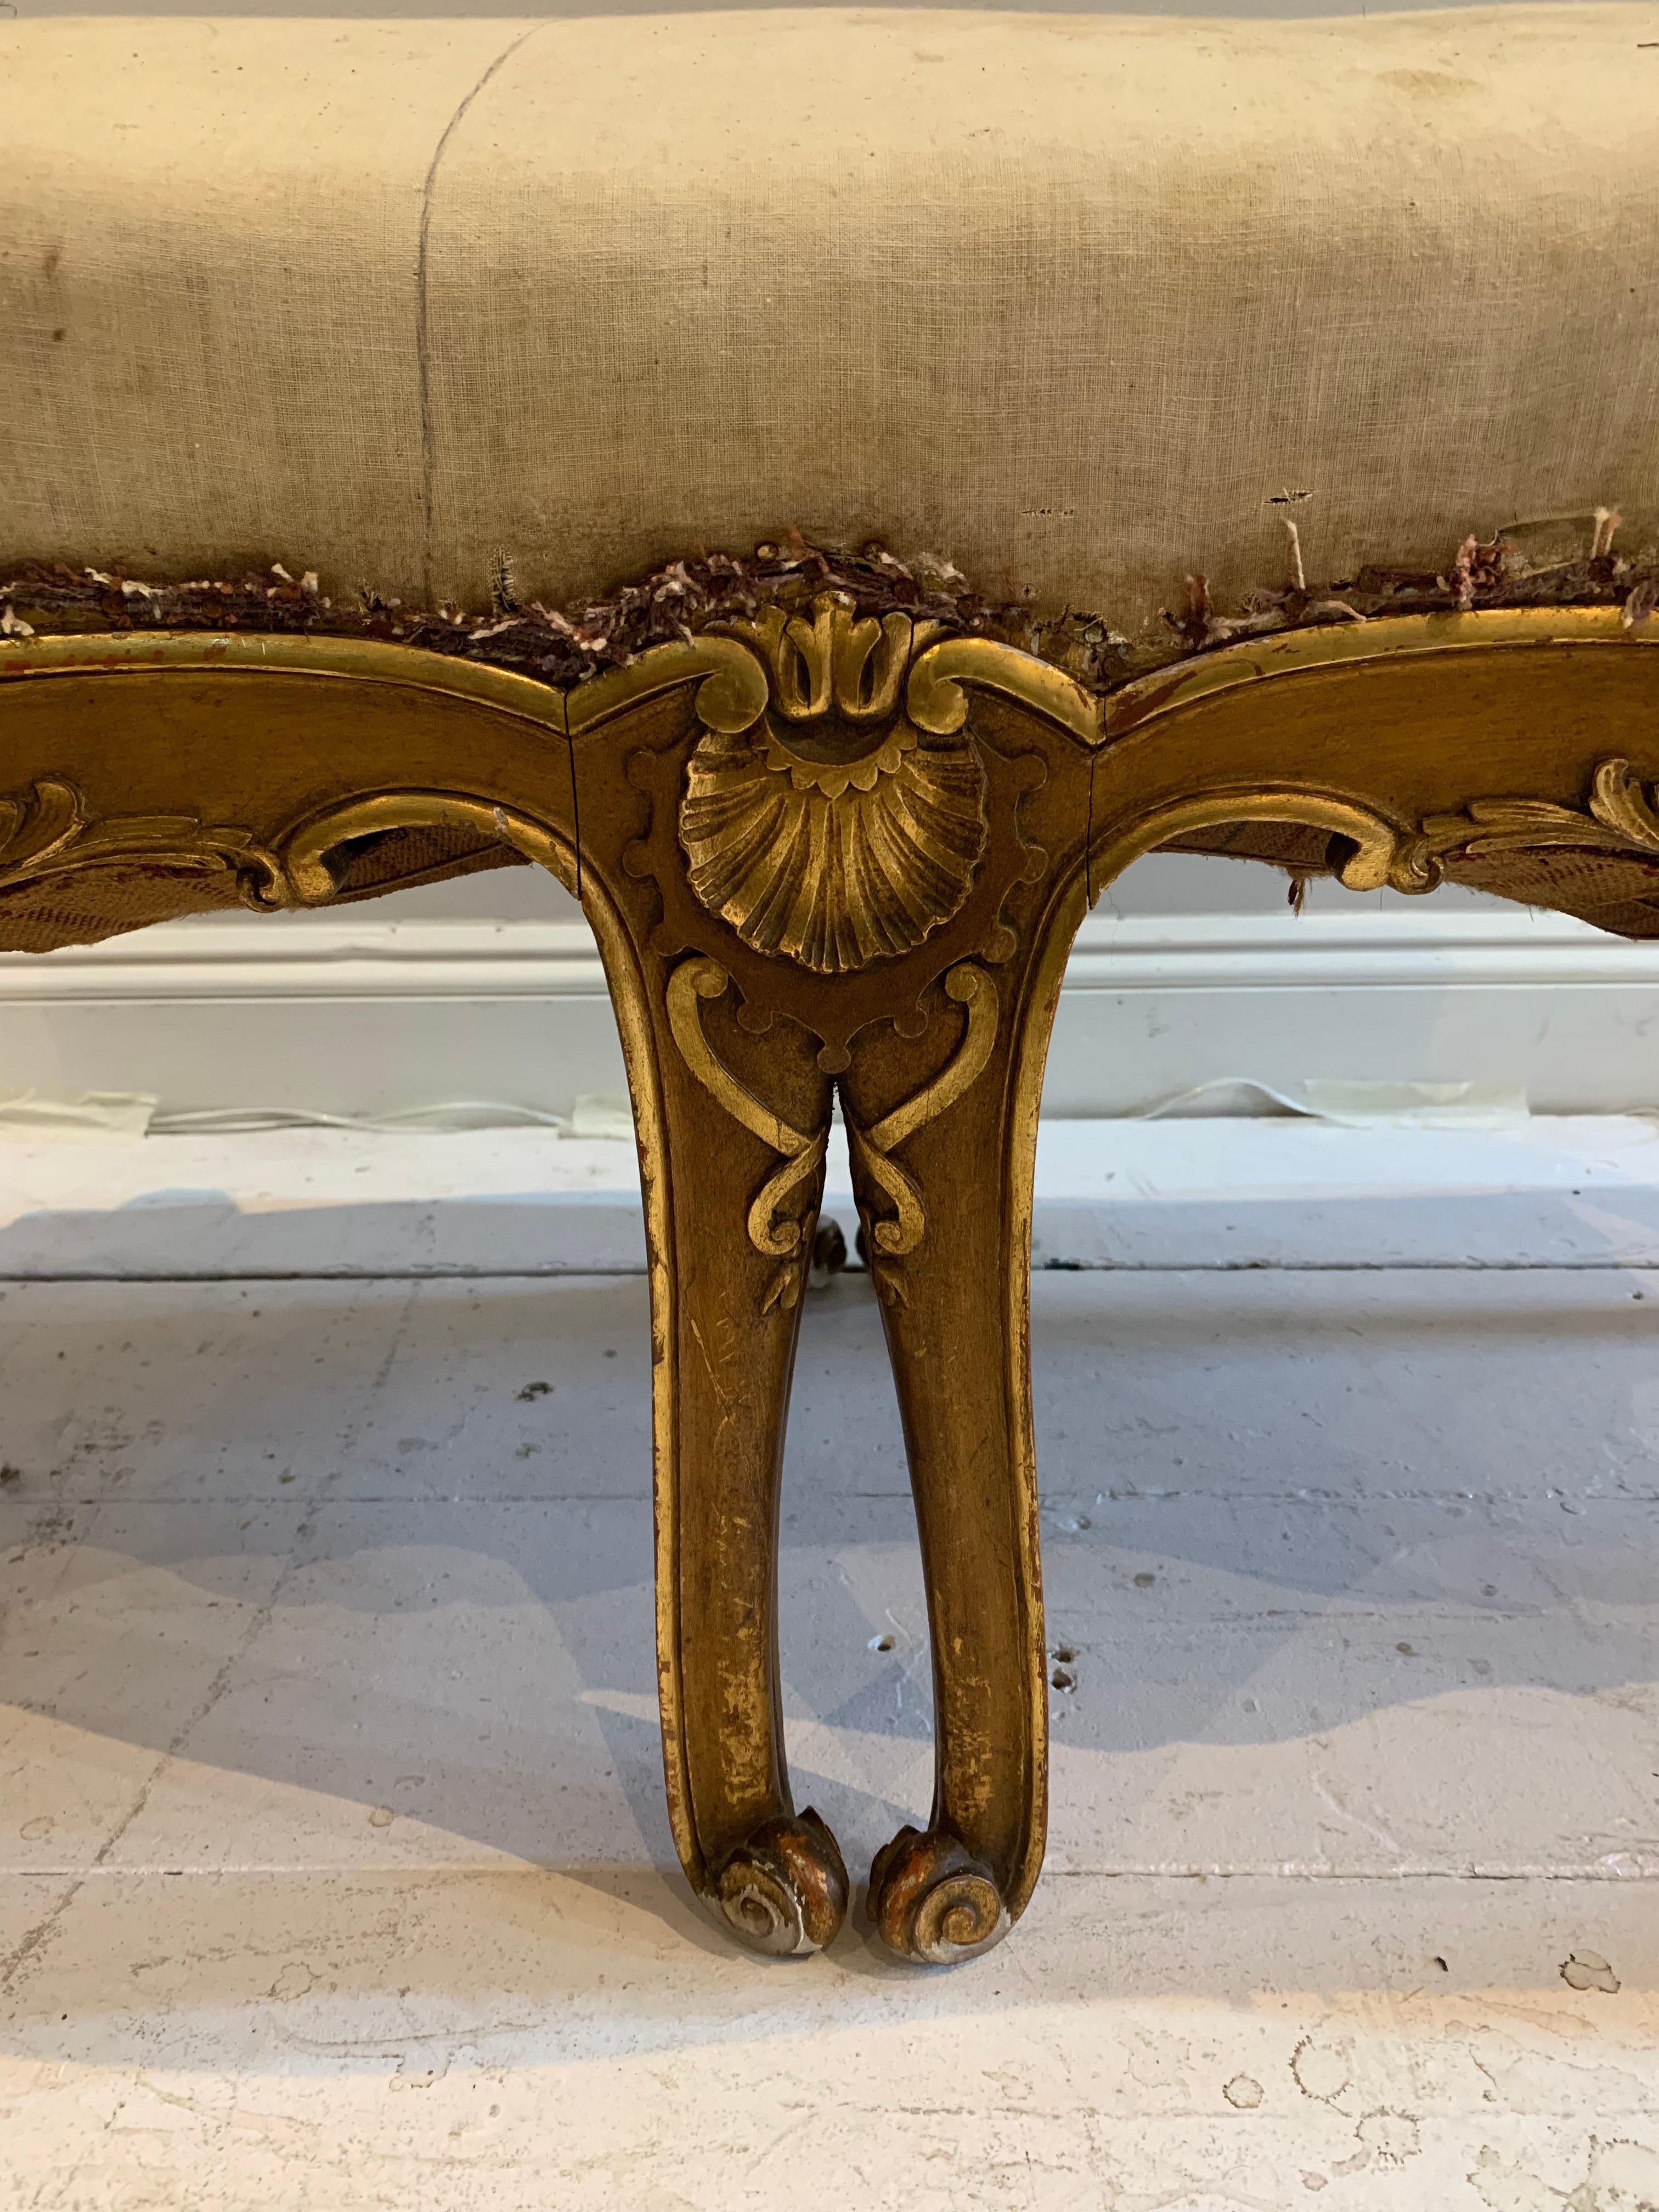 A substantial late 18th century gilt wood window seat/bench from an Irish country house. Inspired by the French rococo-style which is characterised by its lavish and high-relief carvings. 
The seat features high sides, carved swags, shells and